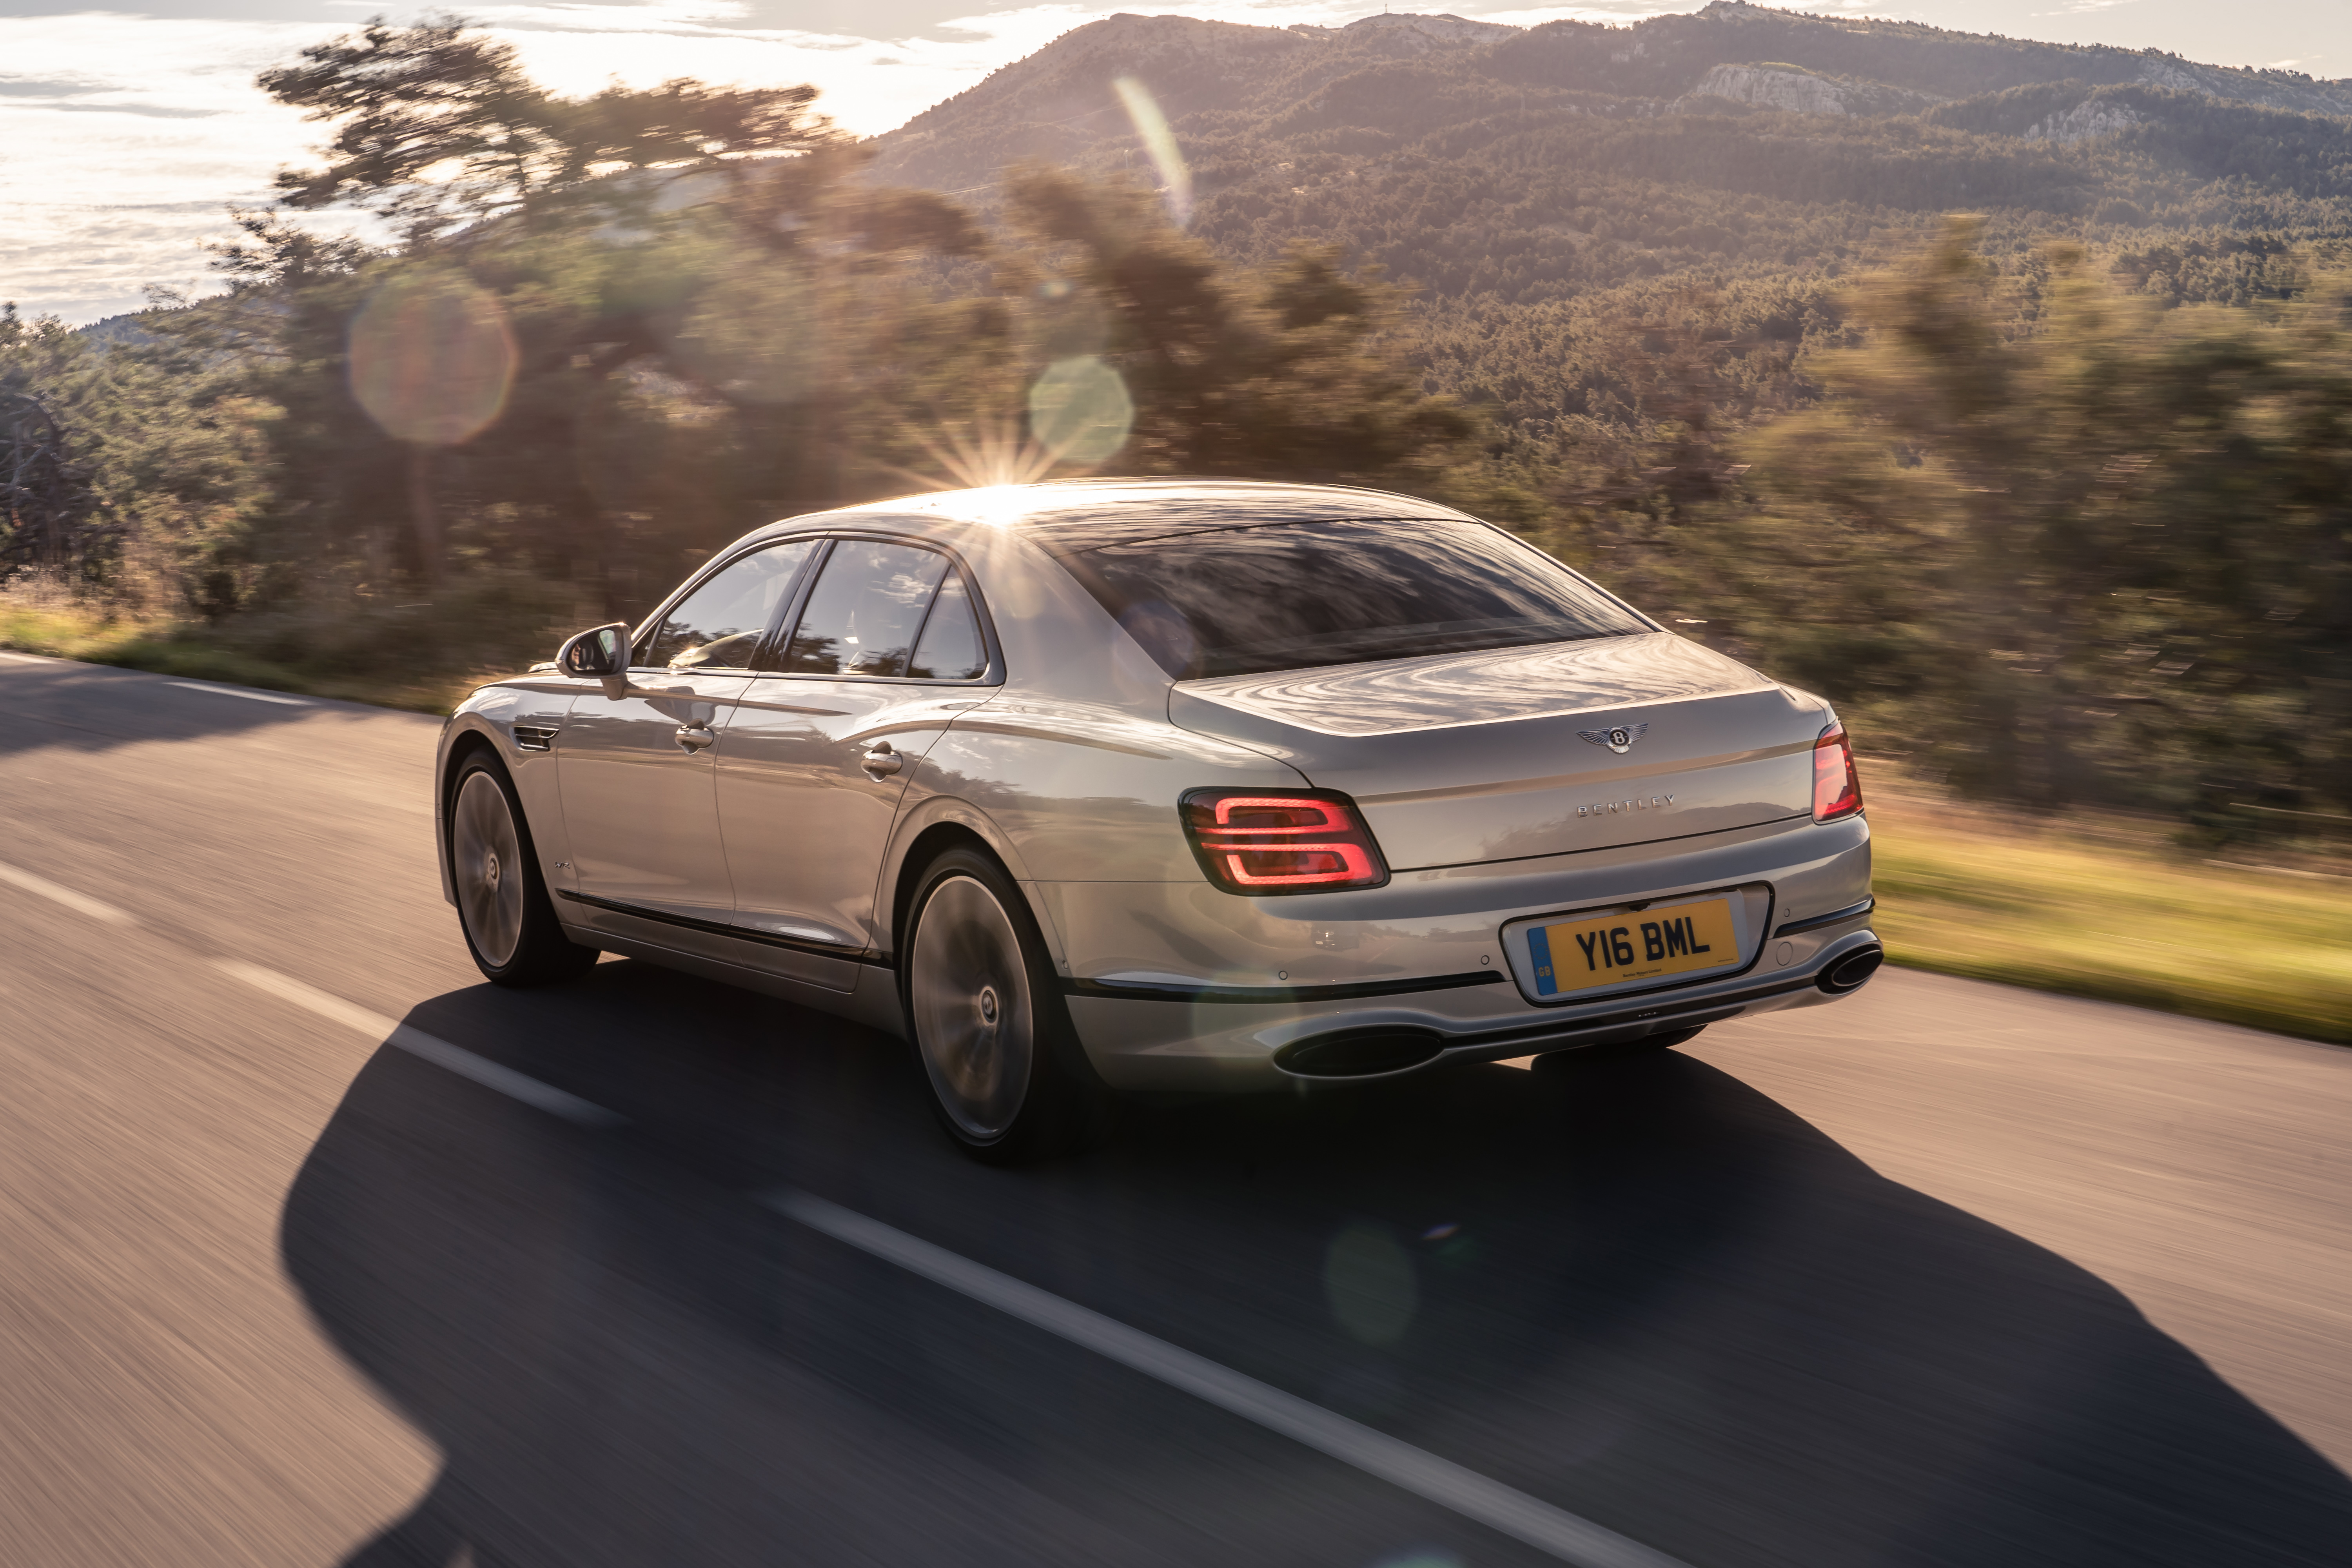 Free photo 2020 Bentley Flying Spur silver color rear view